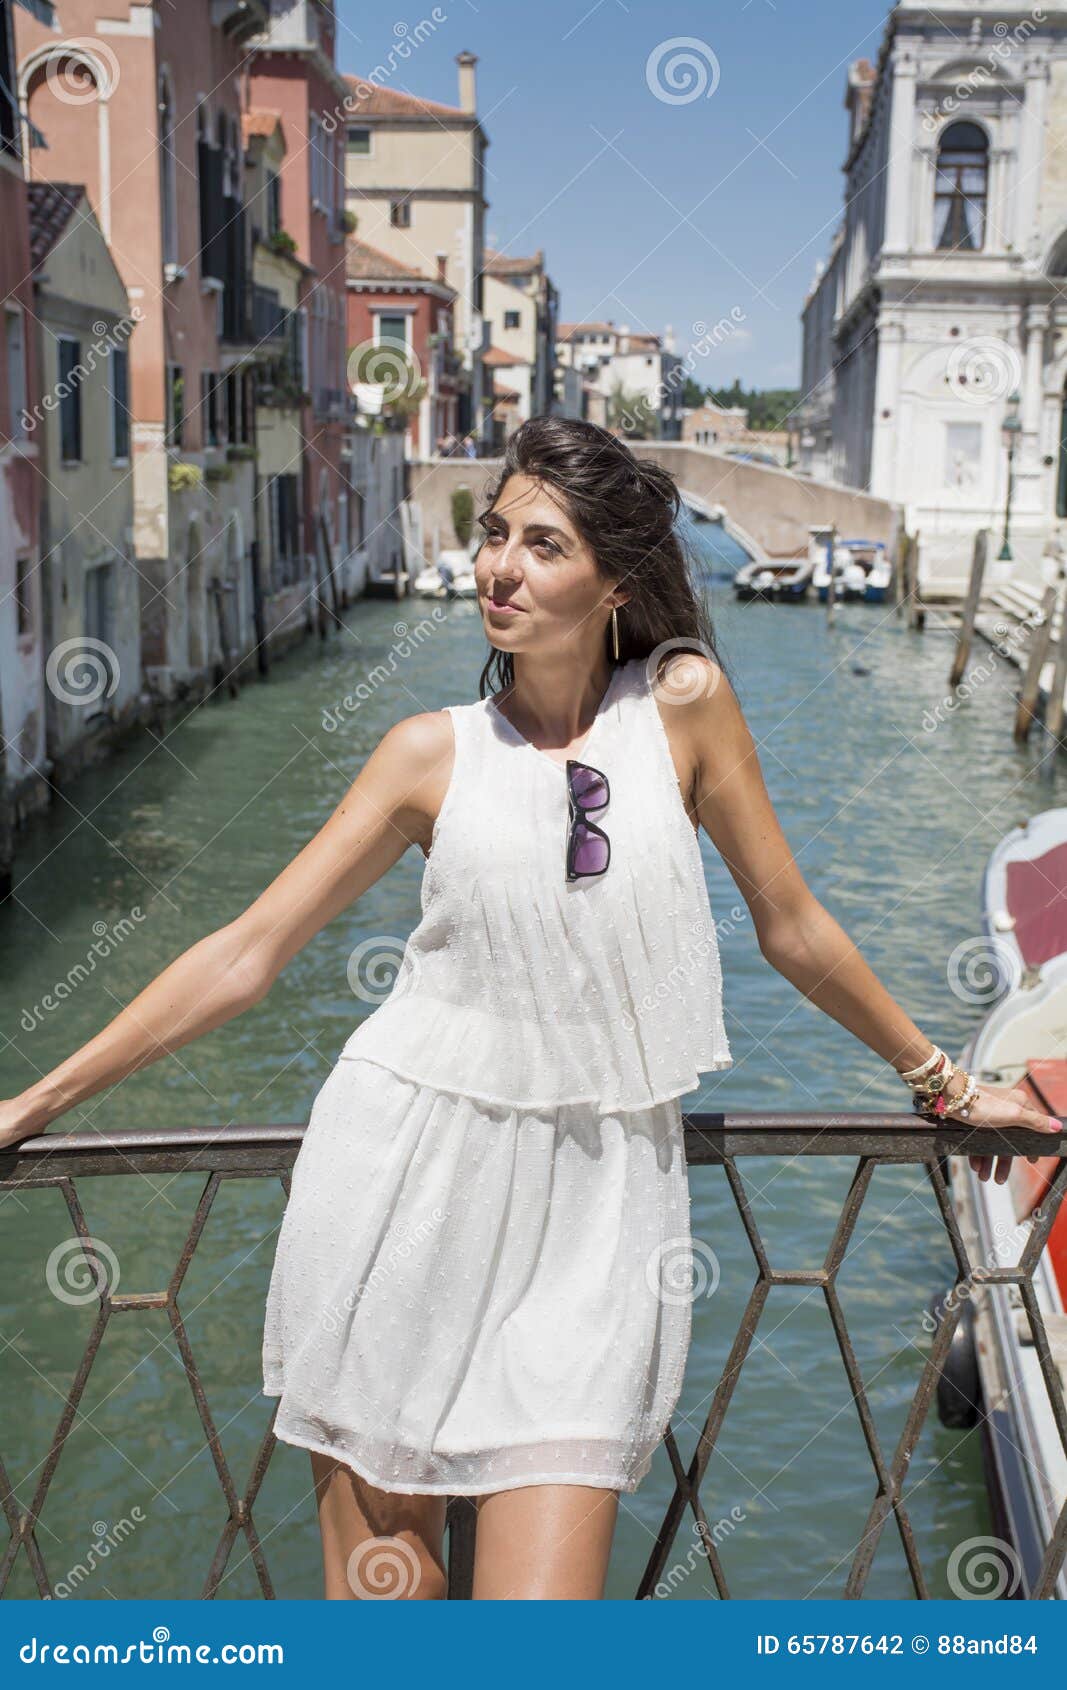 Beautiful Fashion Woman With White Dress In Venice Italy